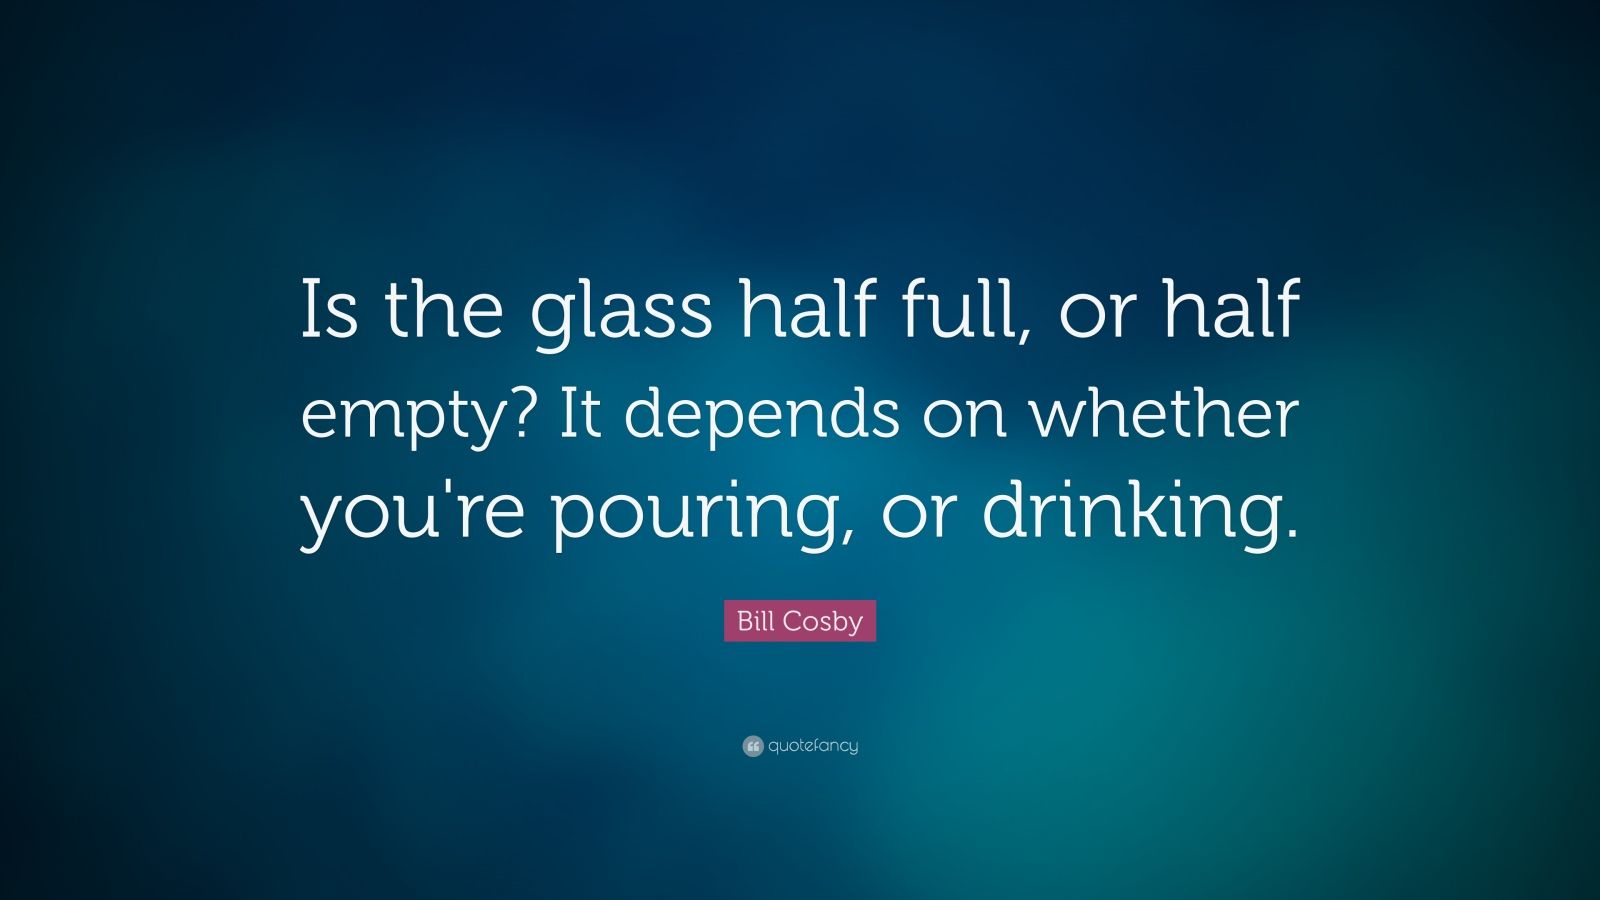 Bill Cosby Quote “is The Glass Half Full Or Half Empty It Depends On Whether Youre Pouring 3708